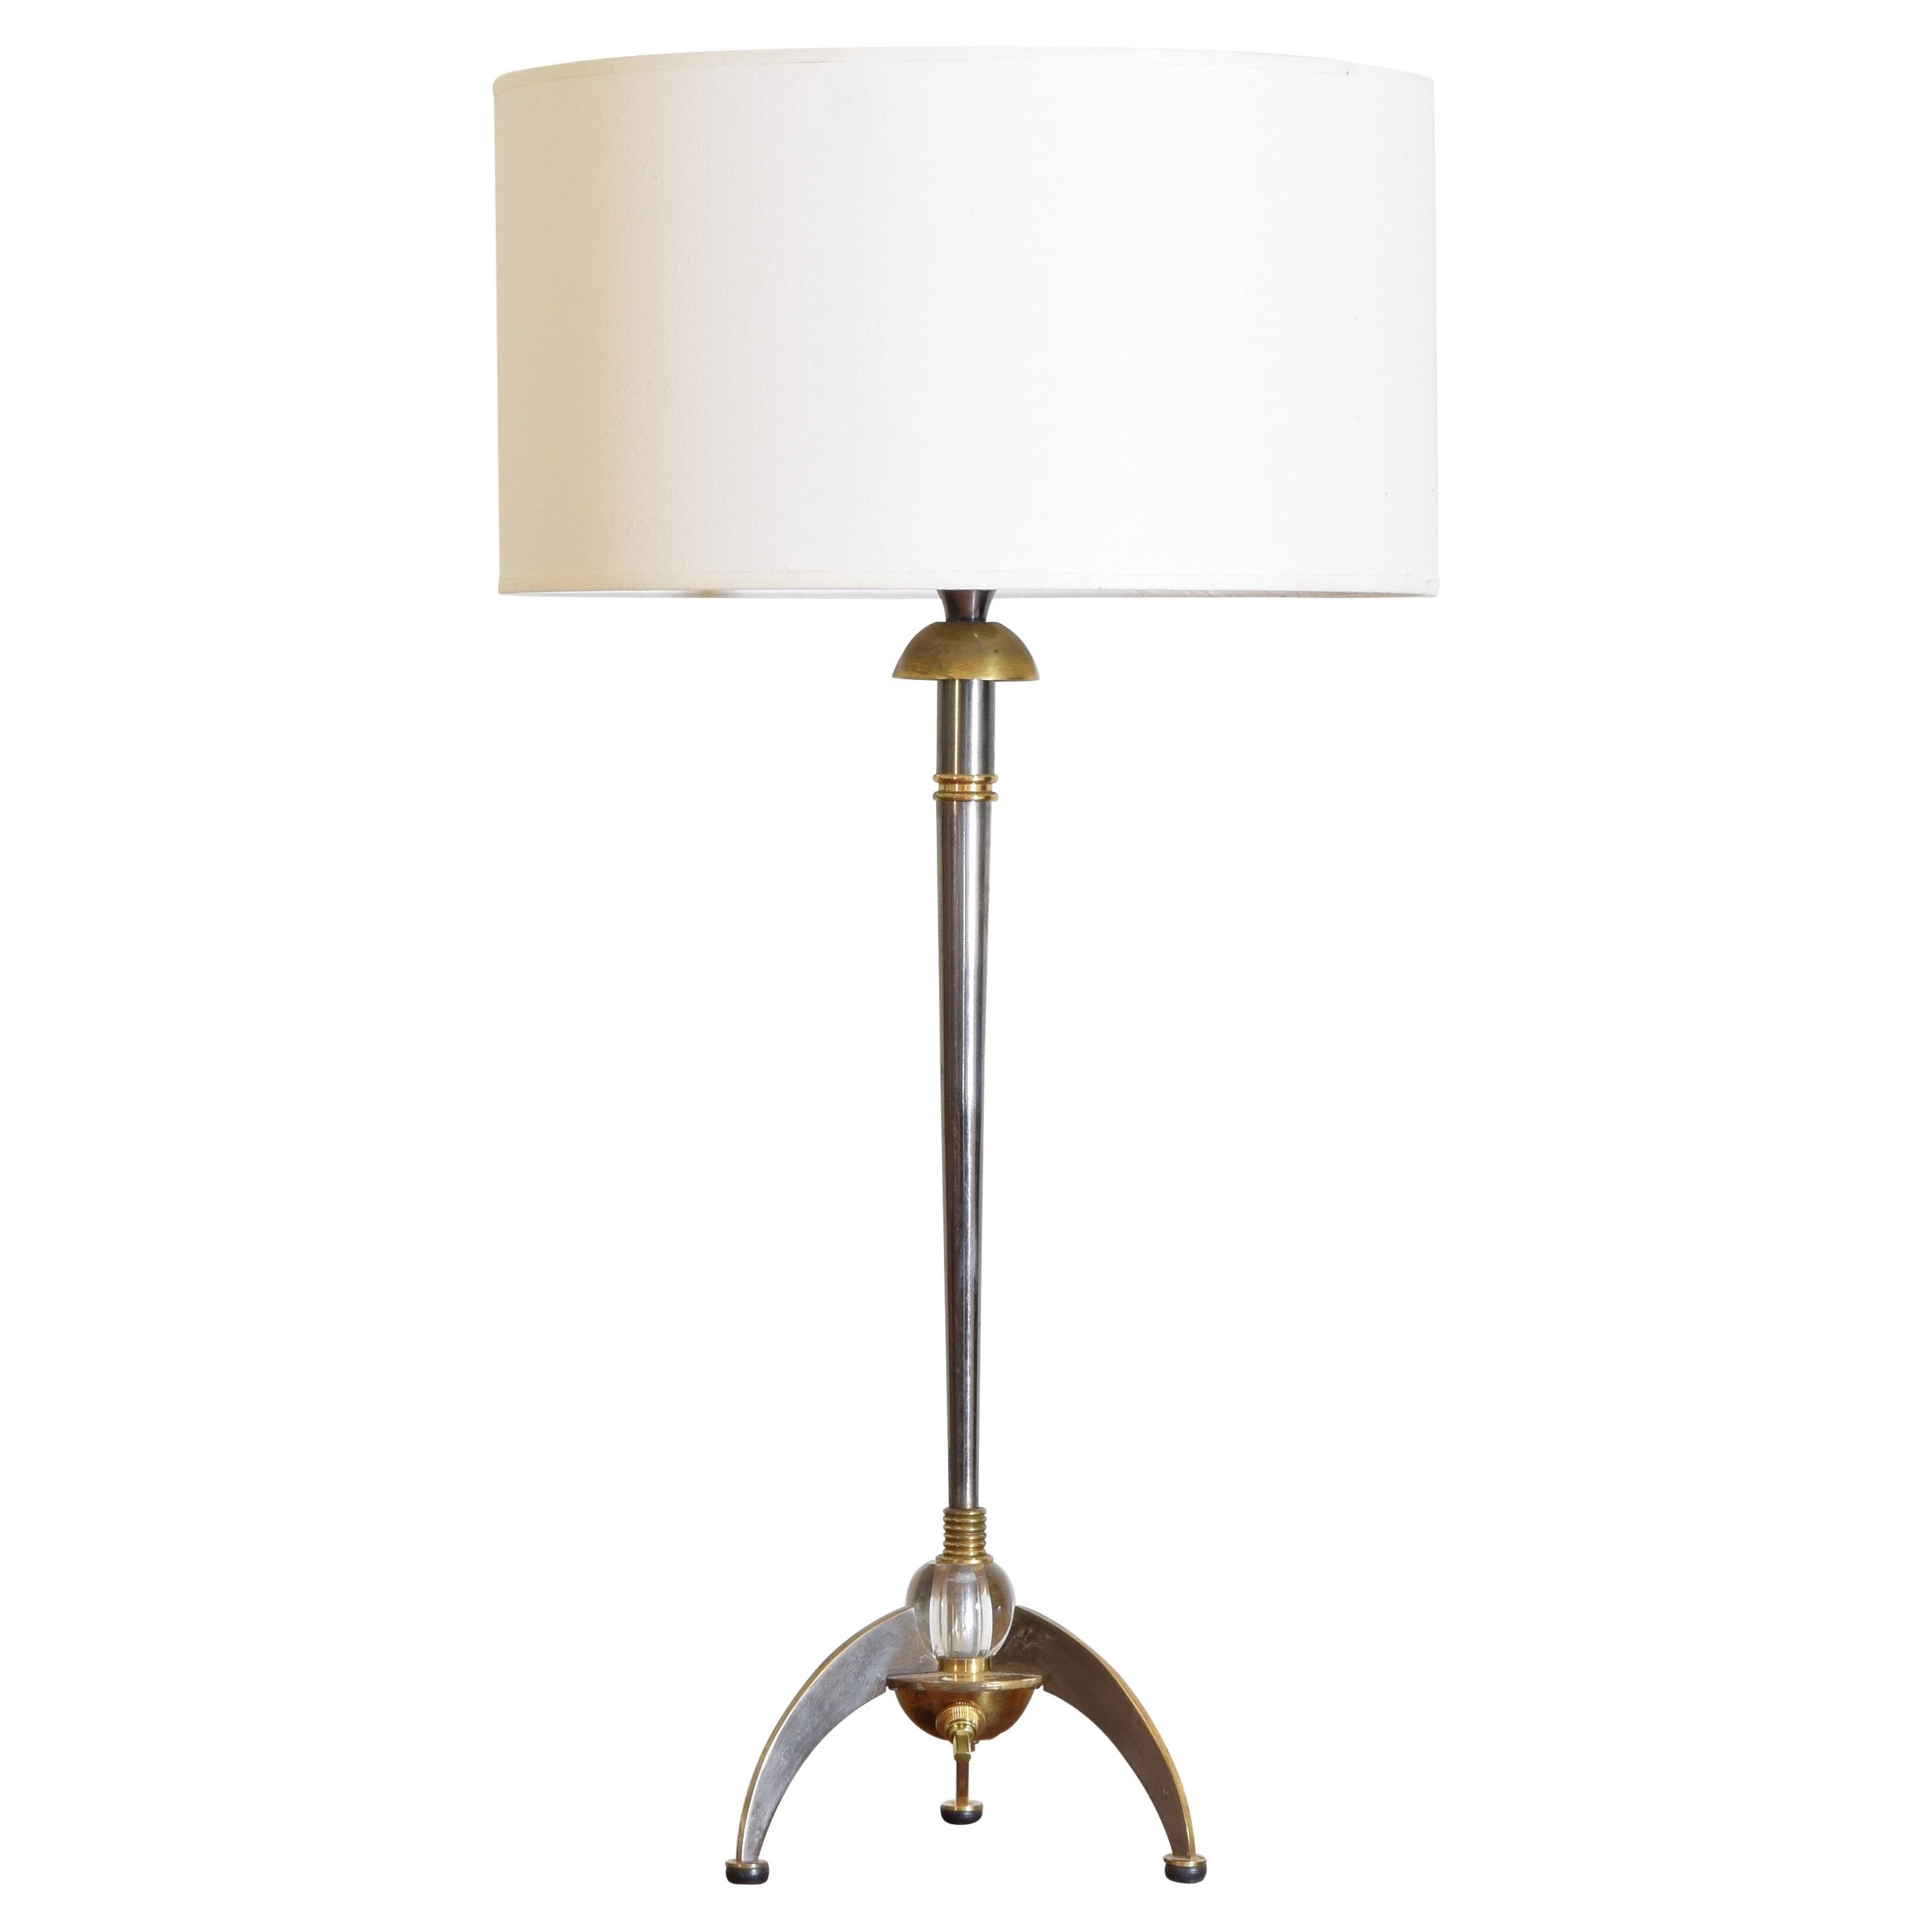 Continental Chrome, Brass, & Glass Table Lamp, 2nd half 20th century